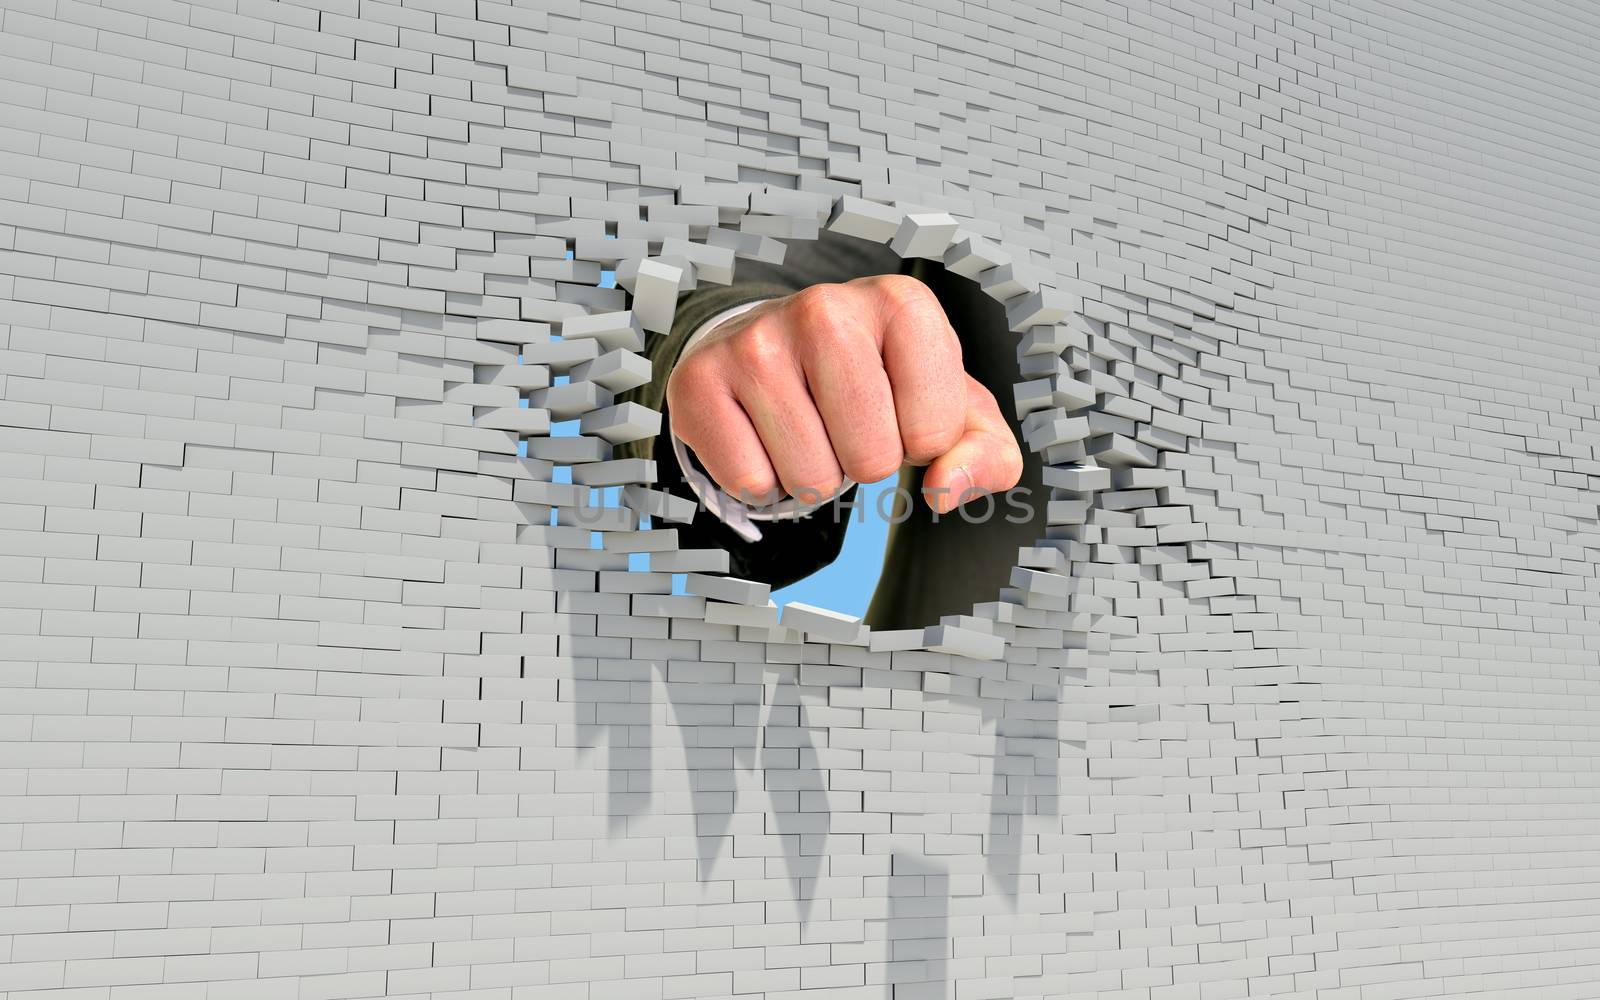 Fist punching through brick wall. Business concept